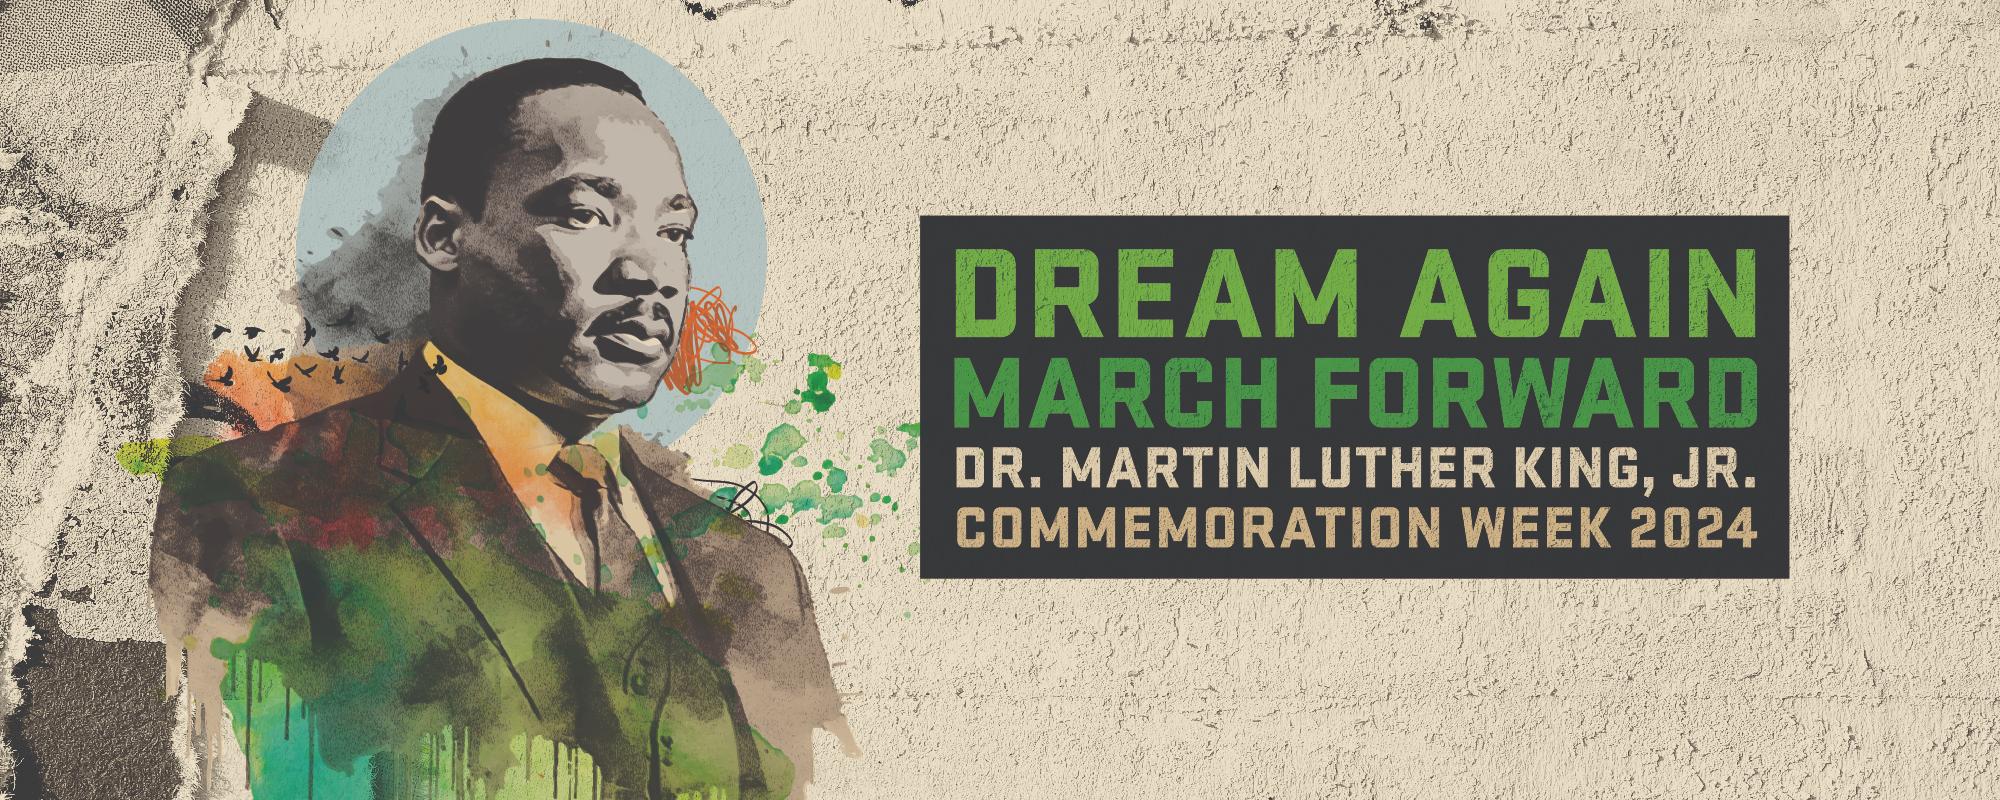 Graphic for MLK Commemoration reading "Dream Again. March Forward. Dr. Martin Luther King, Jr. Commemoration Week 2024"